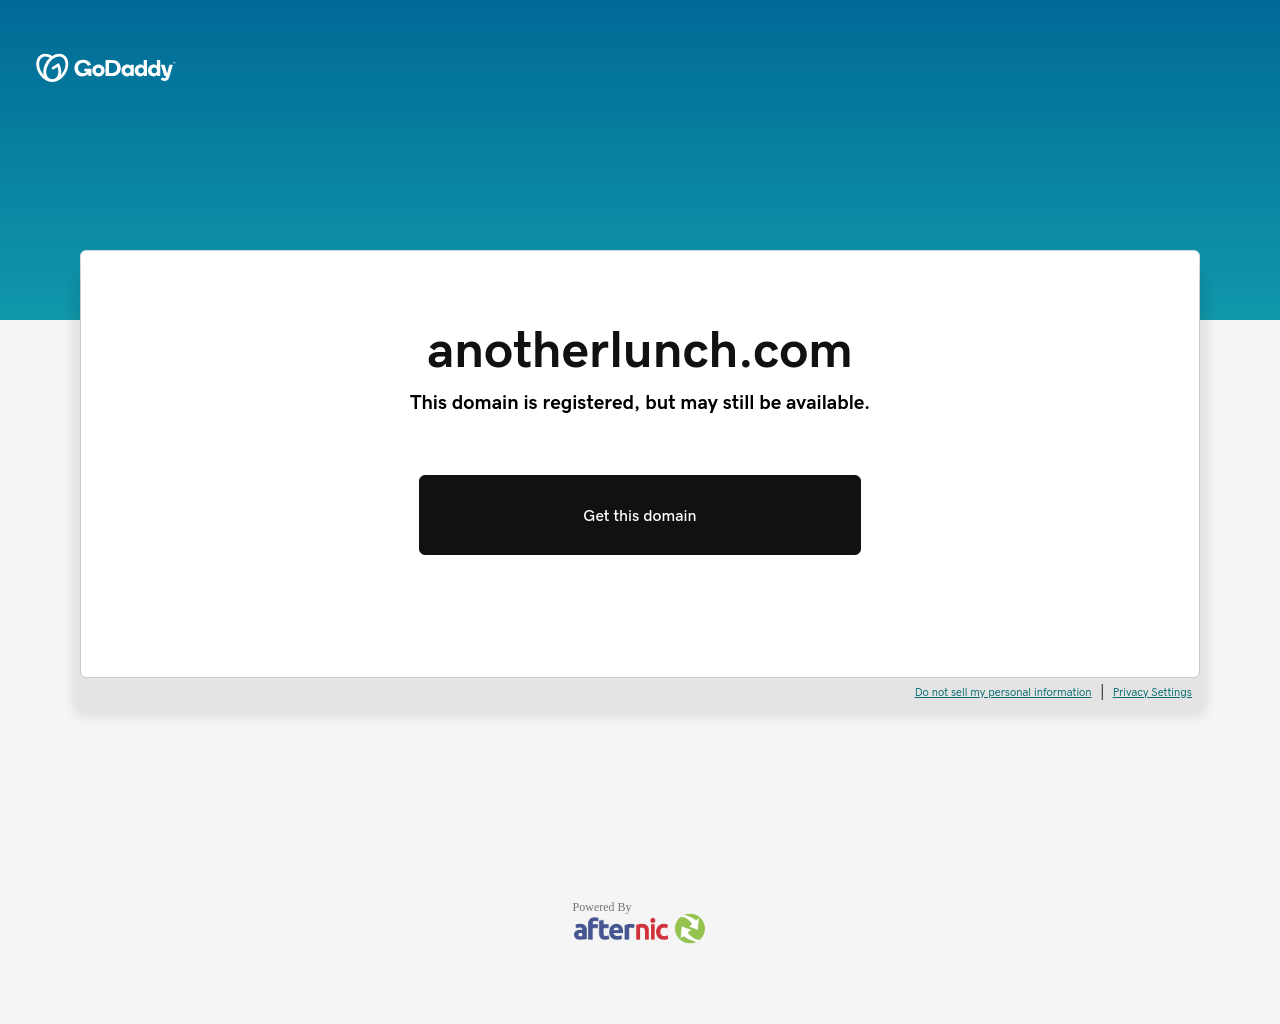 anotherlunch.com